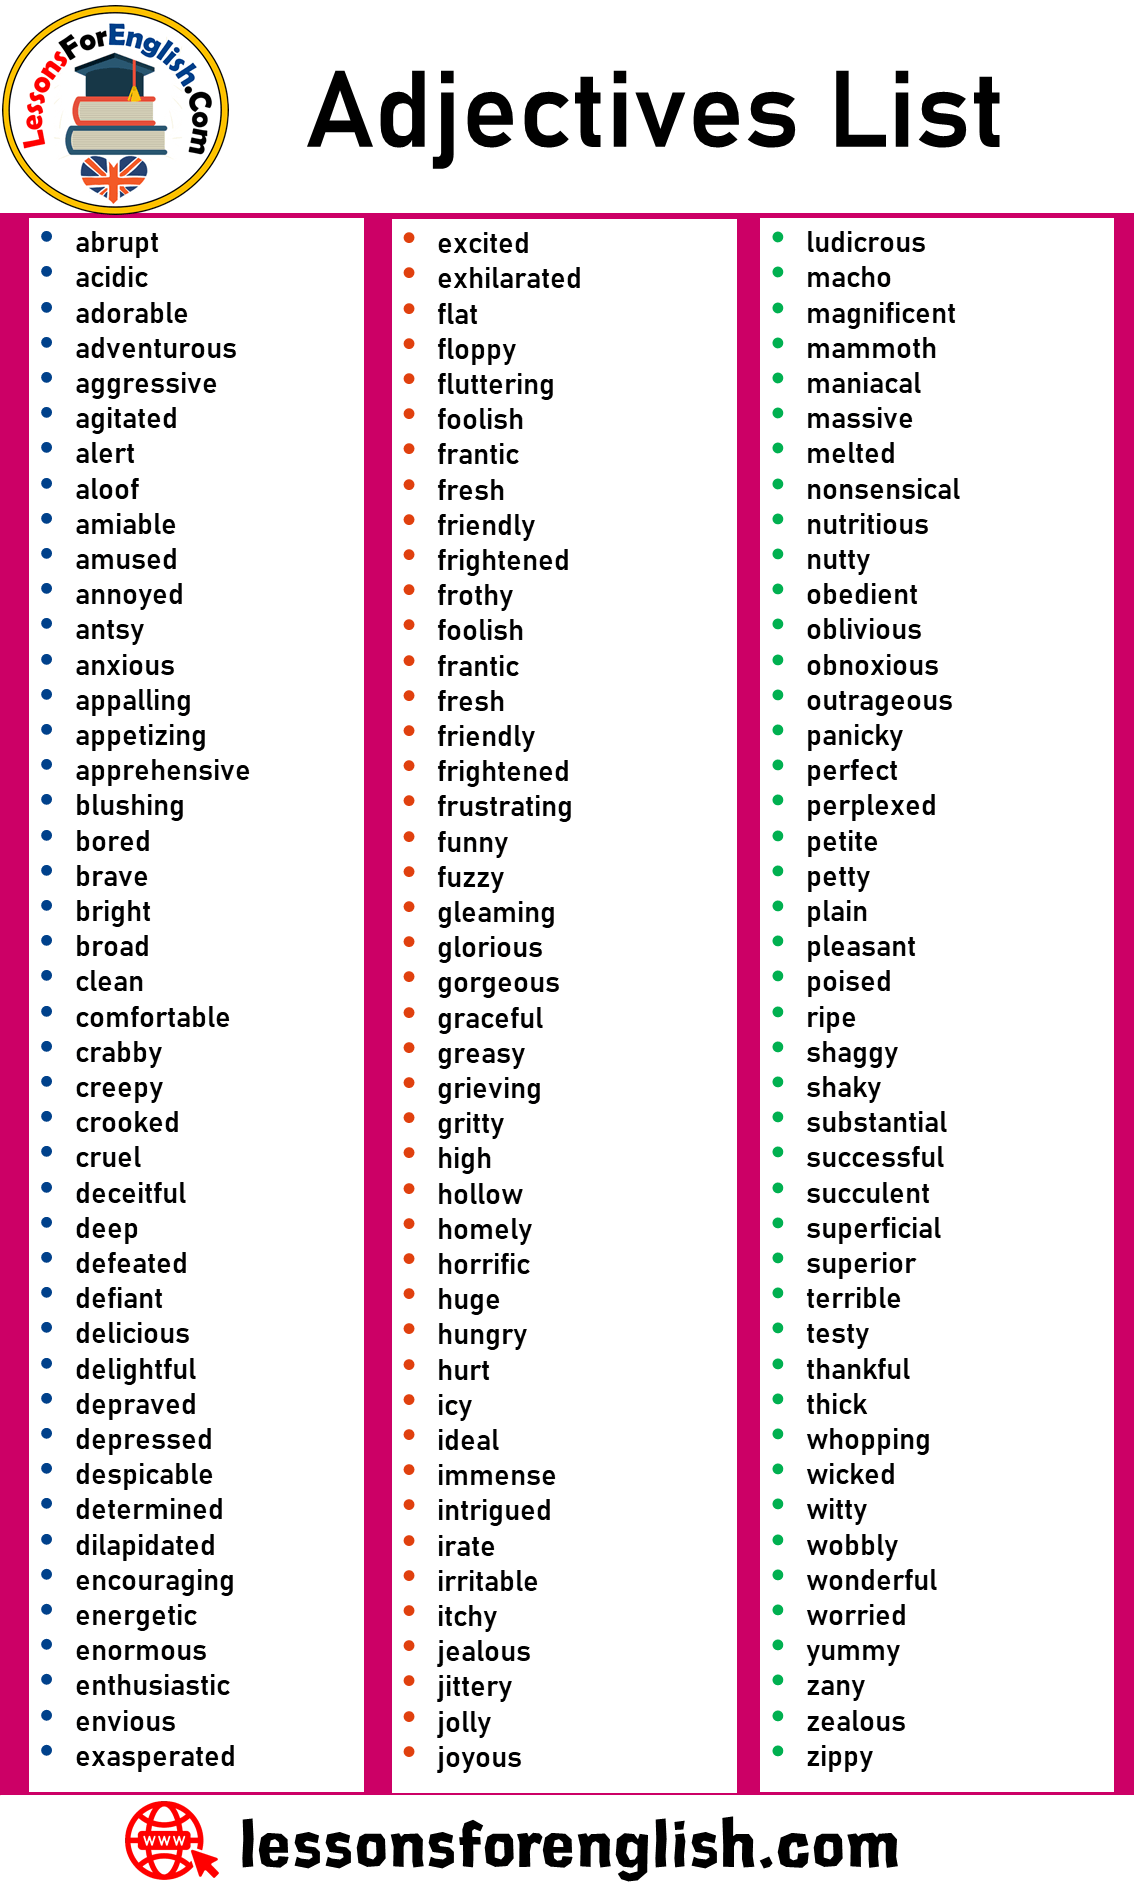 Adjectives List, Adjectives Vocabulary Word List - Lessons For English